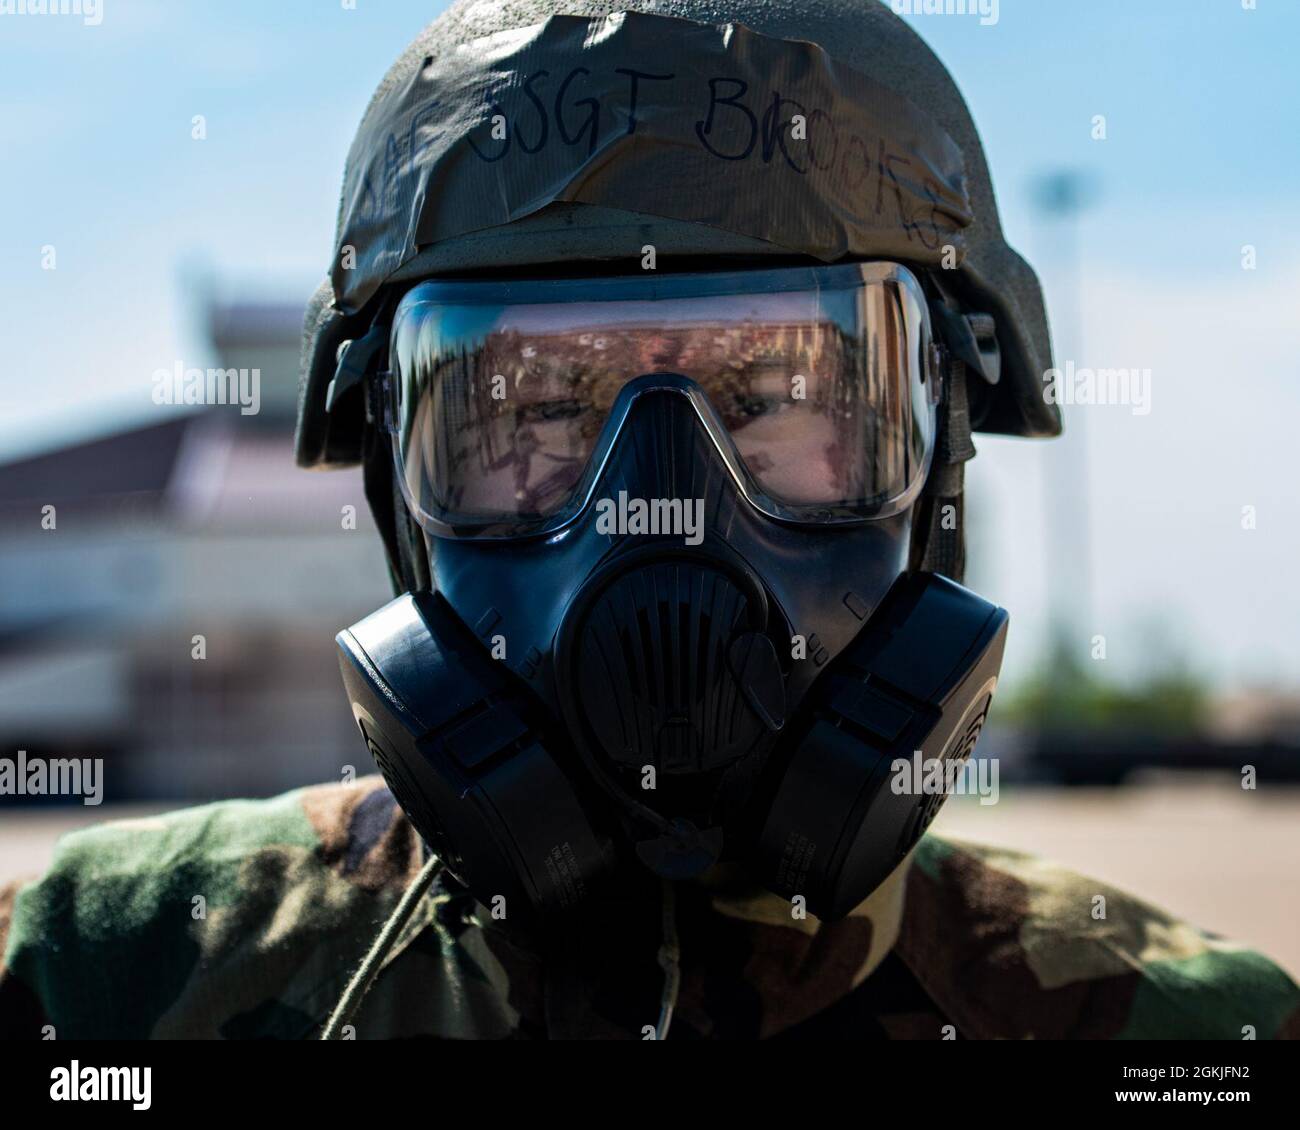 Pennsylvania Air National Guardsman, Staff Sgt. Kyle Brooks, assigned to the 171st Air Refueling Wing, poses for an image during an ability to survive and operate exercise, May 2, 2021. The wing conducted an ATSO exercise to train guardsmen how to perform normal duty tasks in a potentially hazardous environment. (Pennsylvania A Stock Photo